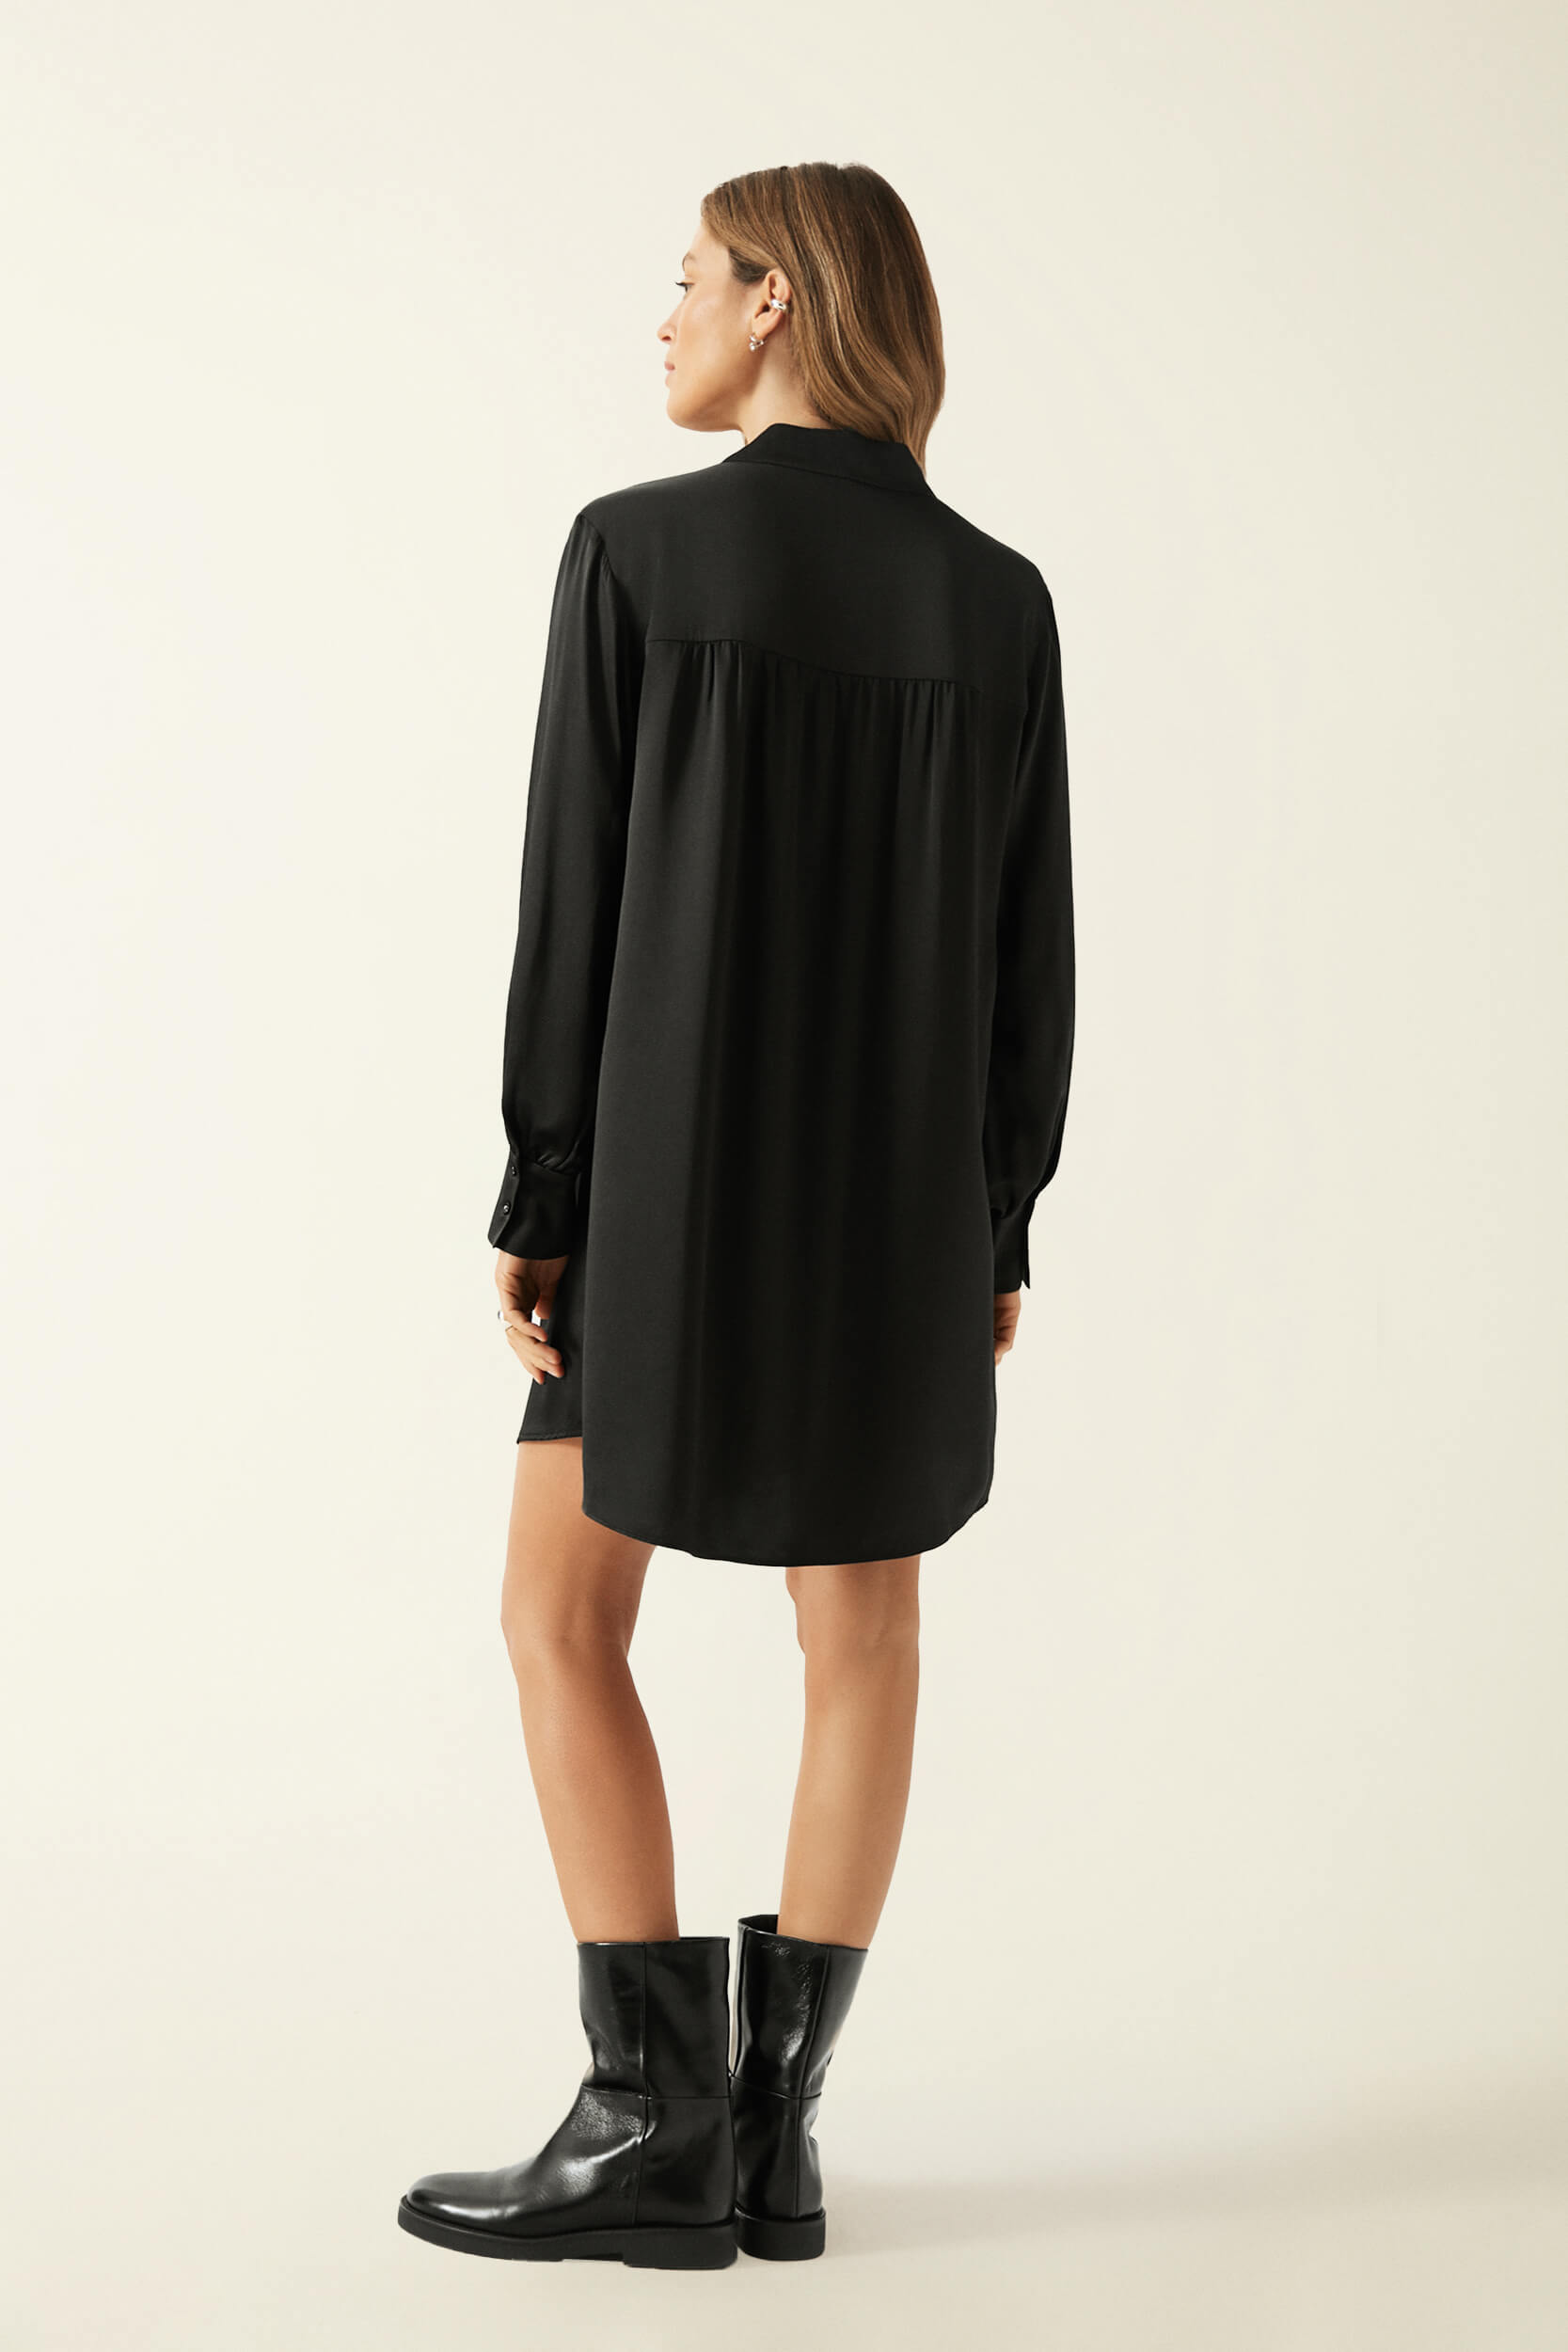 MINI SILK DRESS WITH STAND-UP COLLAR IN BLACK